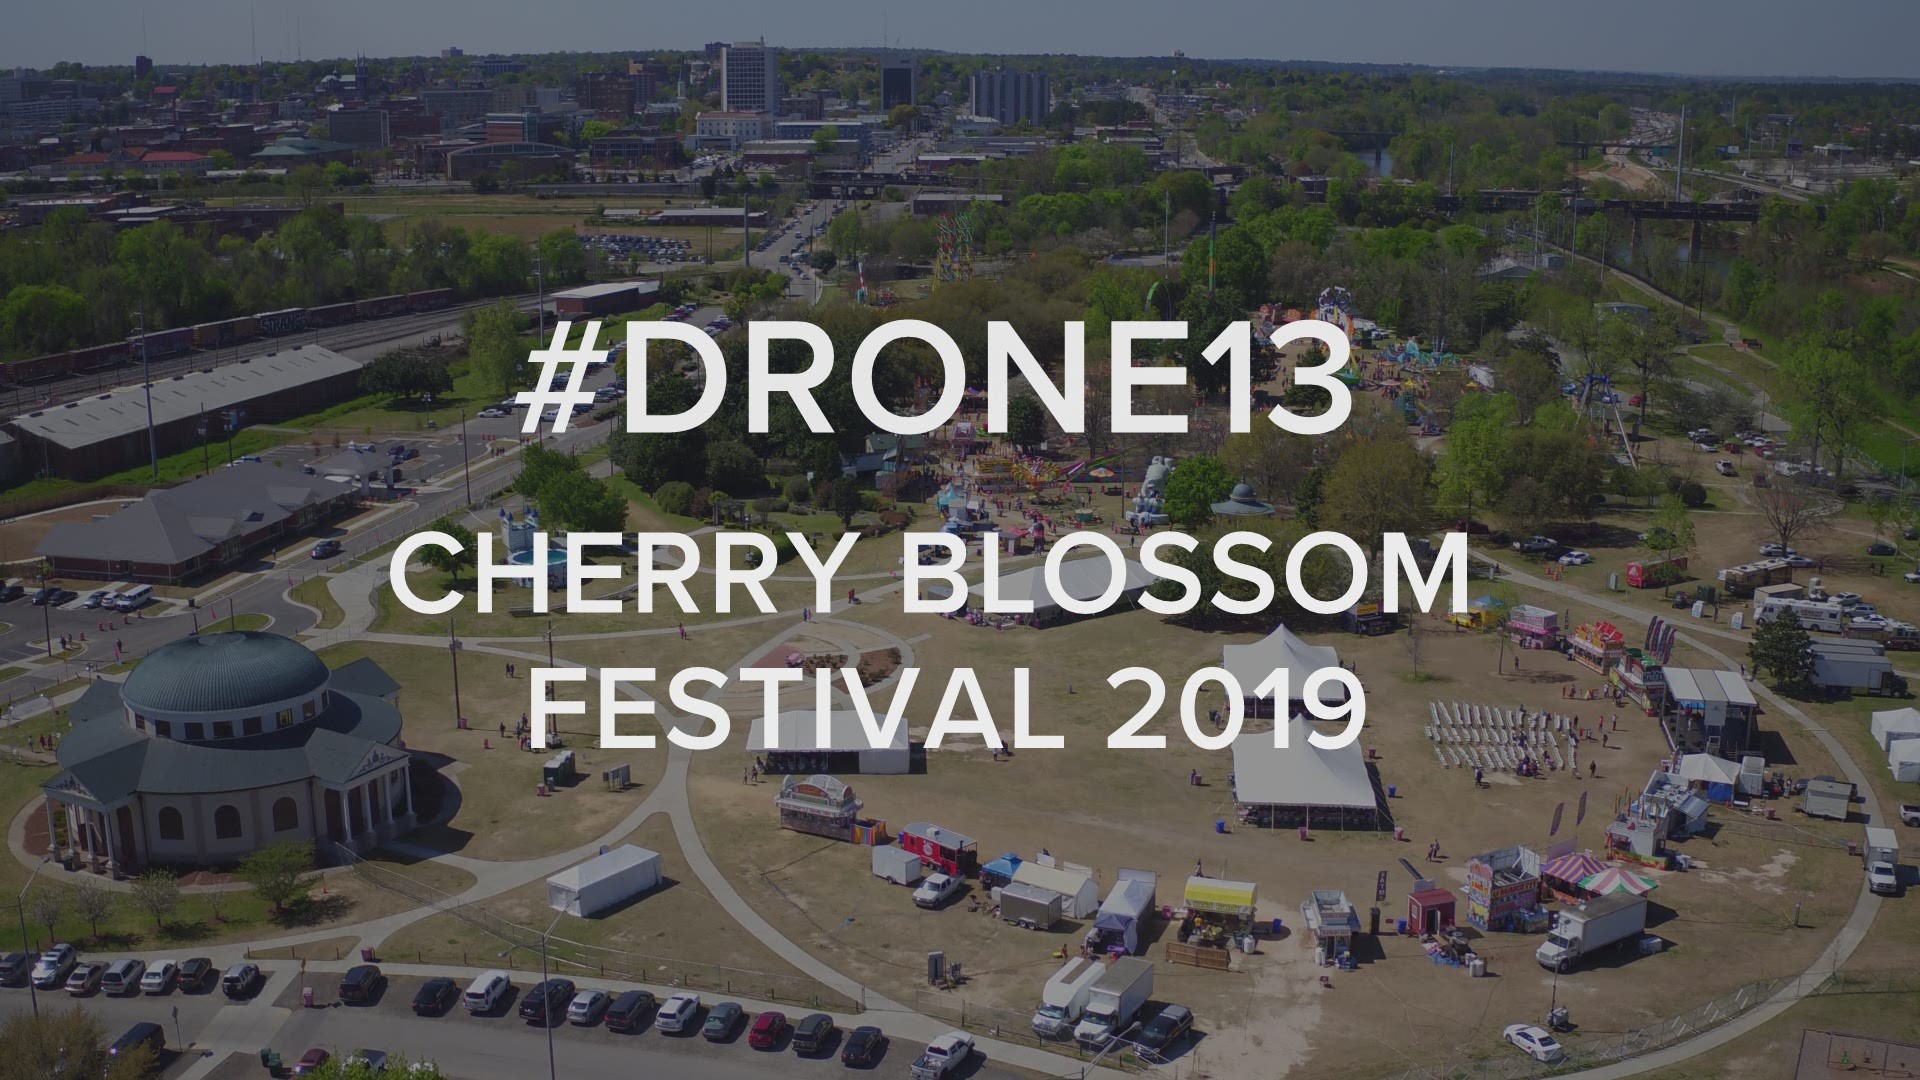 Here's an aerial view of the 2019 Cherry Blossom Festival at Central City Park in downtown Macon.